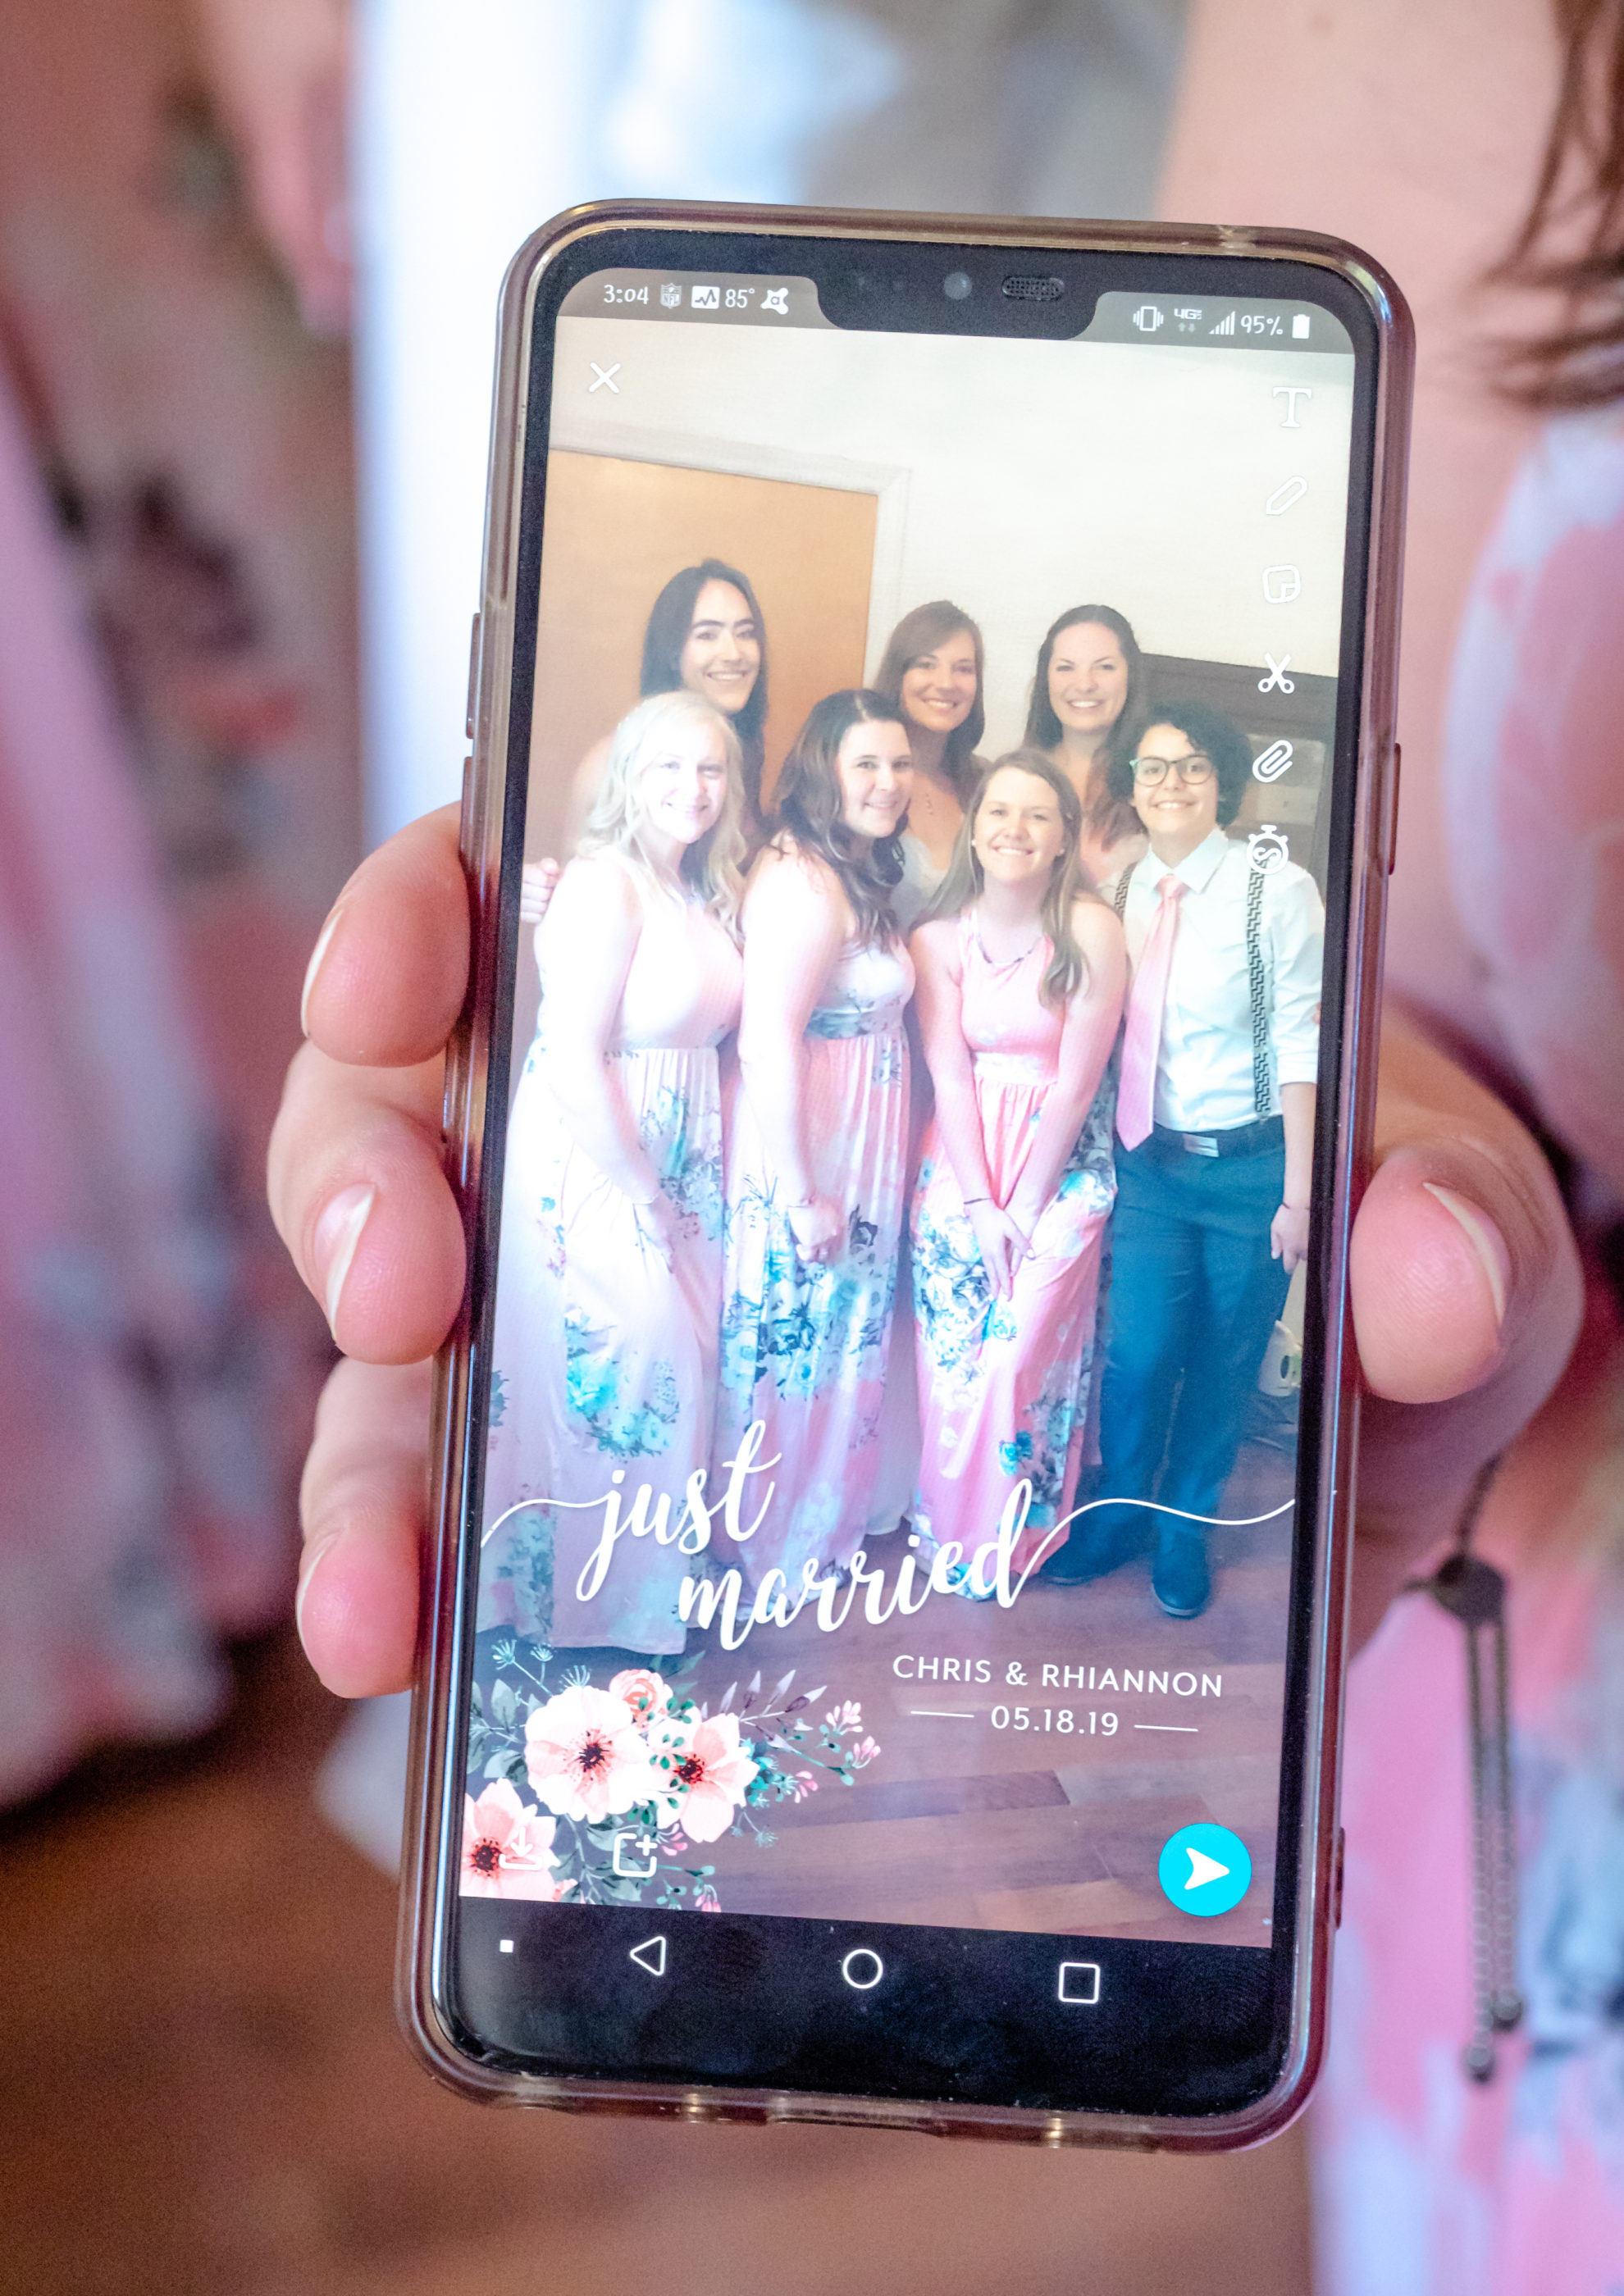 maid of honor's cell phone showing just married instagram post